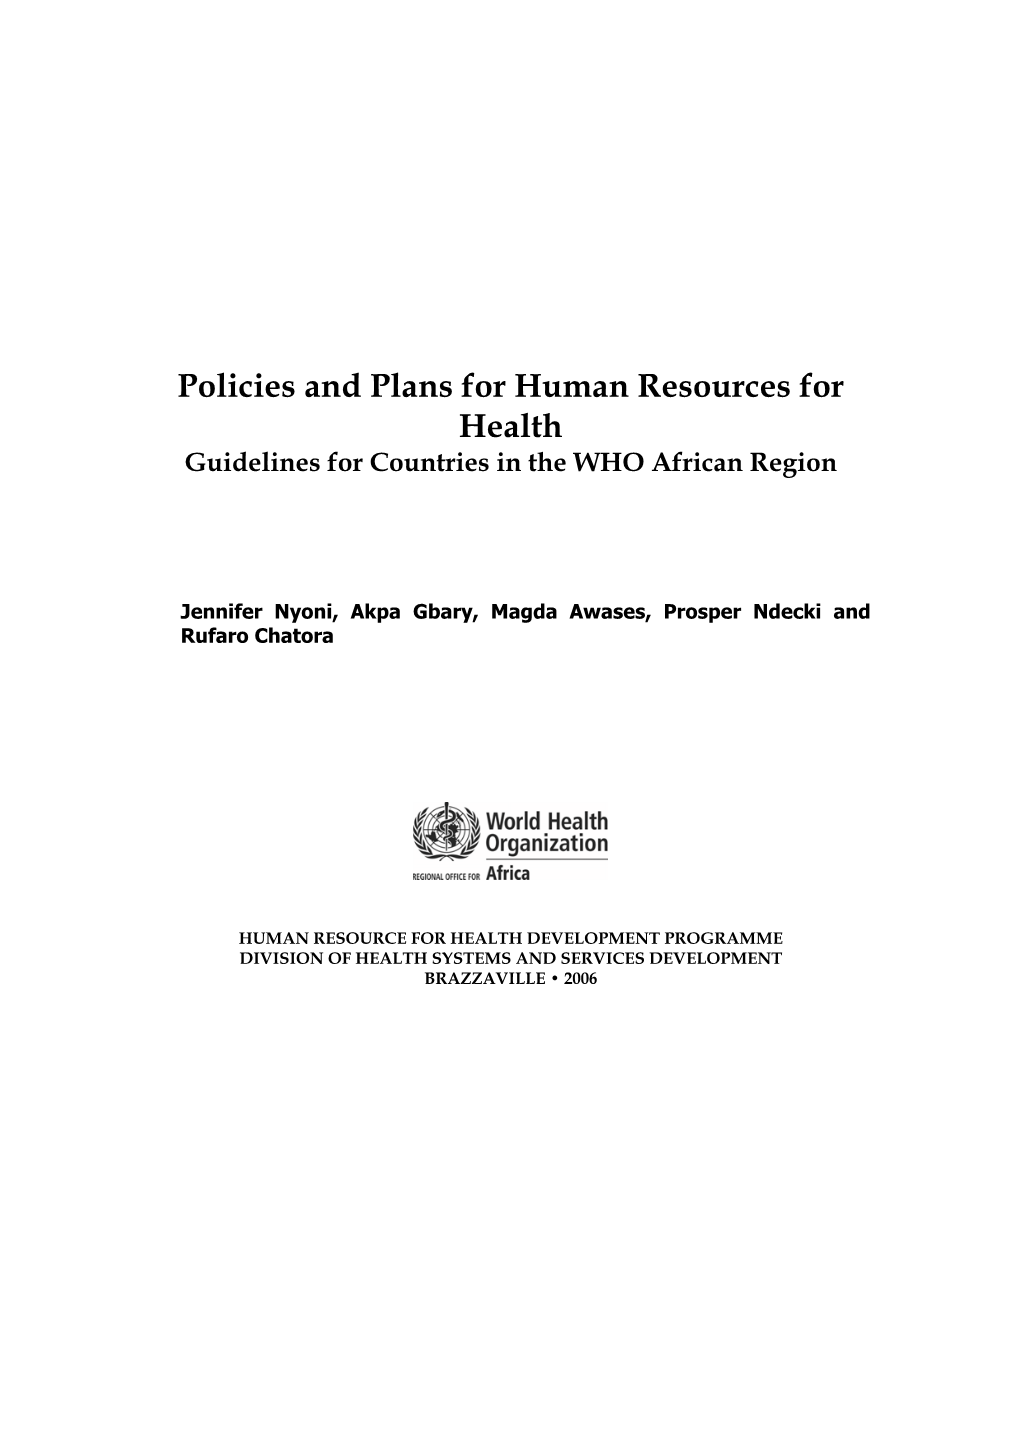 Developing Human Resources for Health Policy and Plan